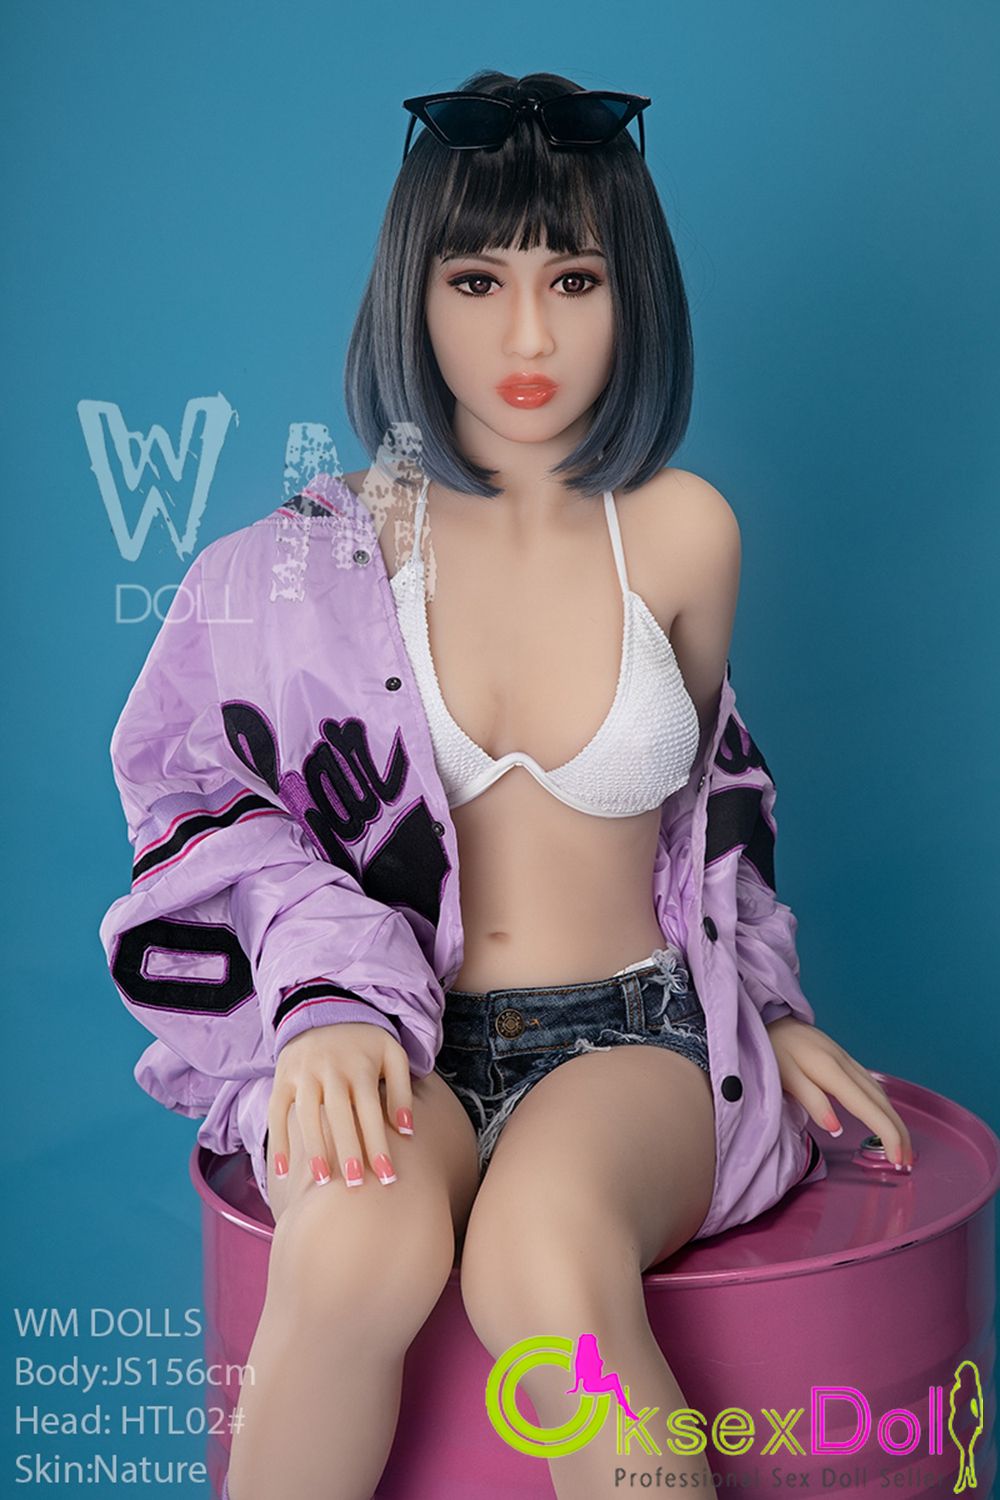 Young Looking sex doll Photos